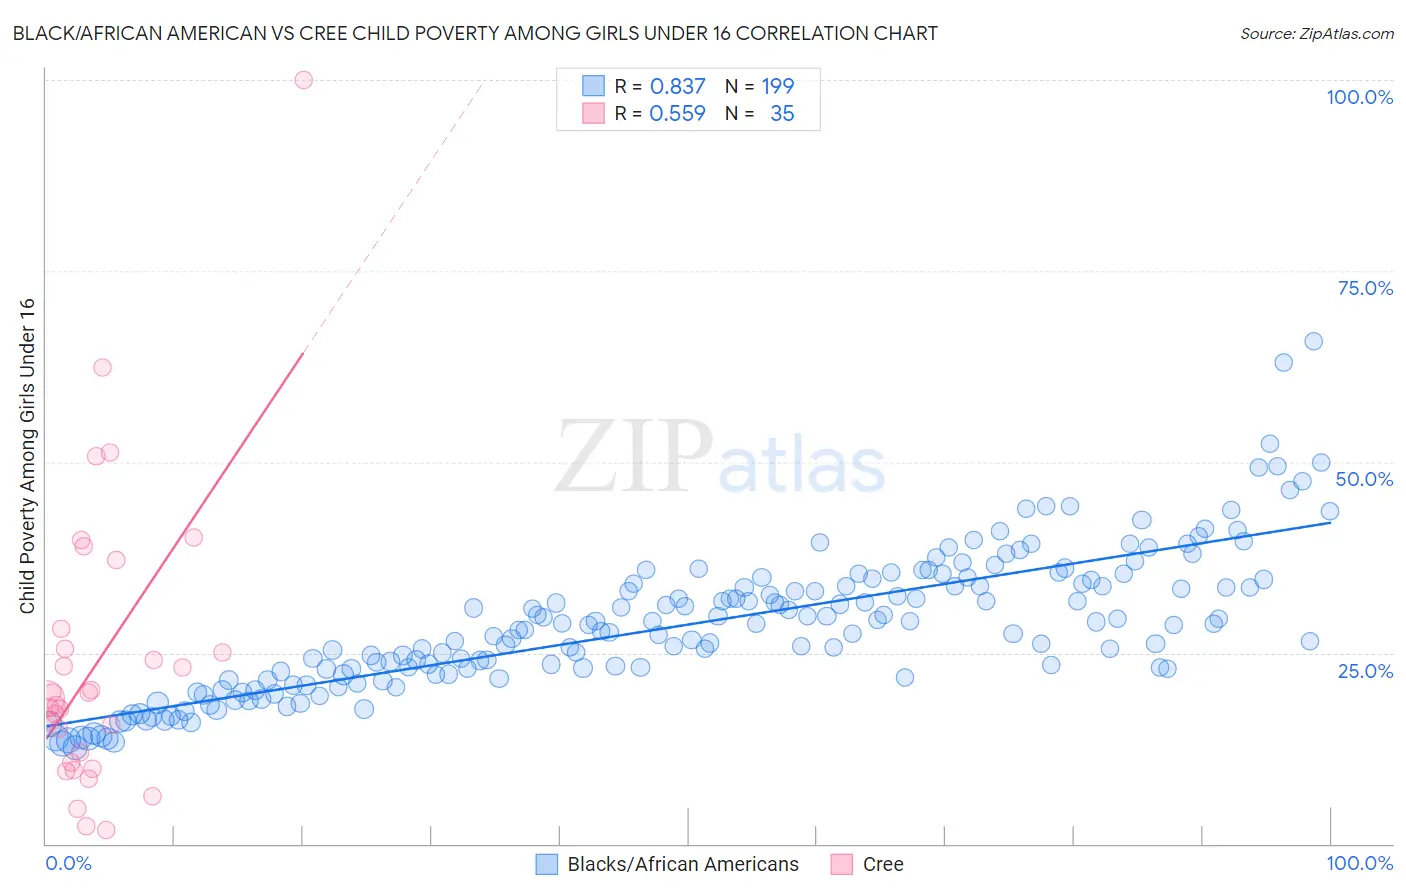 Black/African American vs Cree Child Poverty Among Girls Under 16